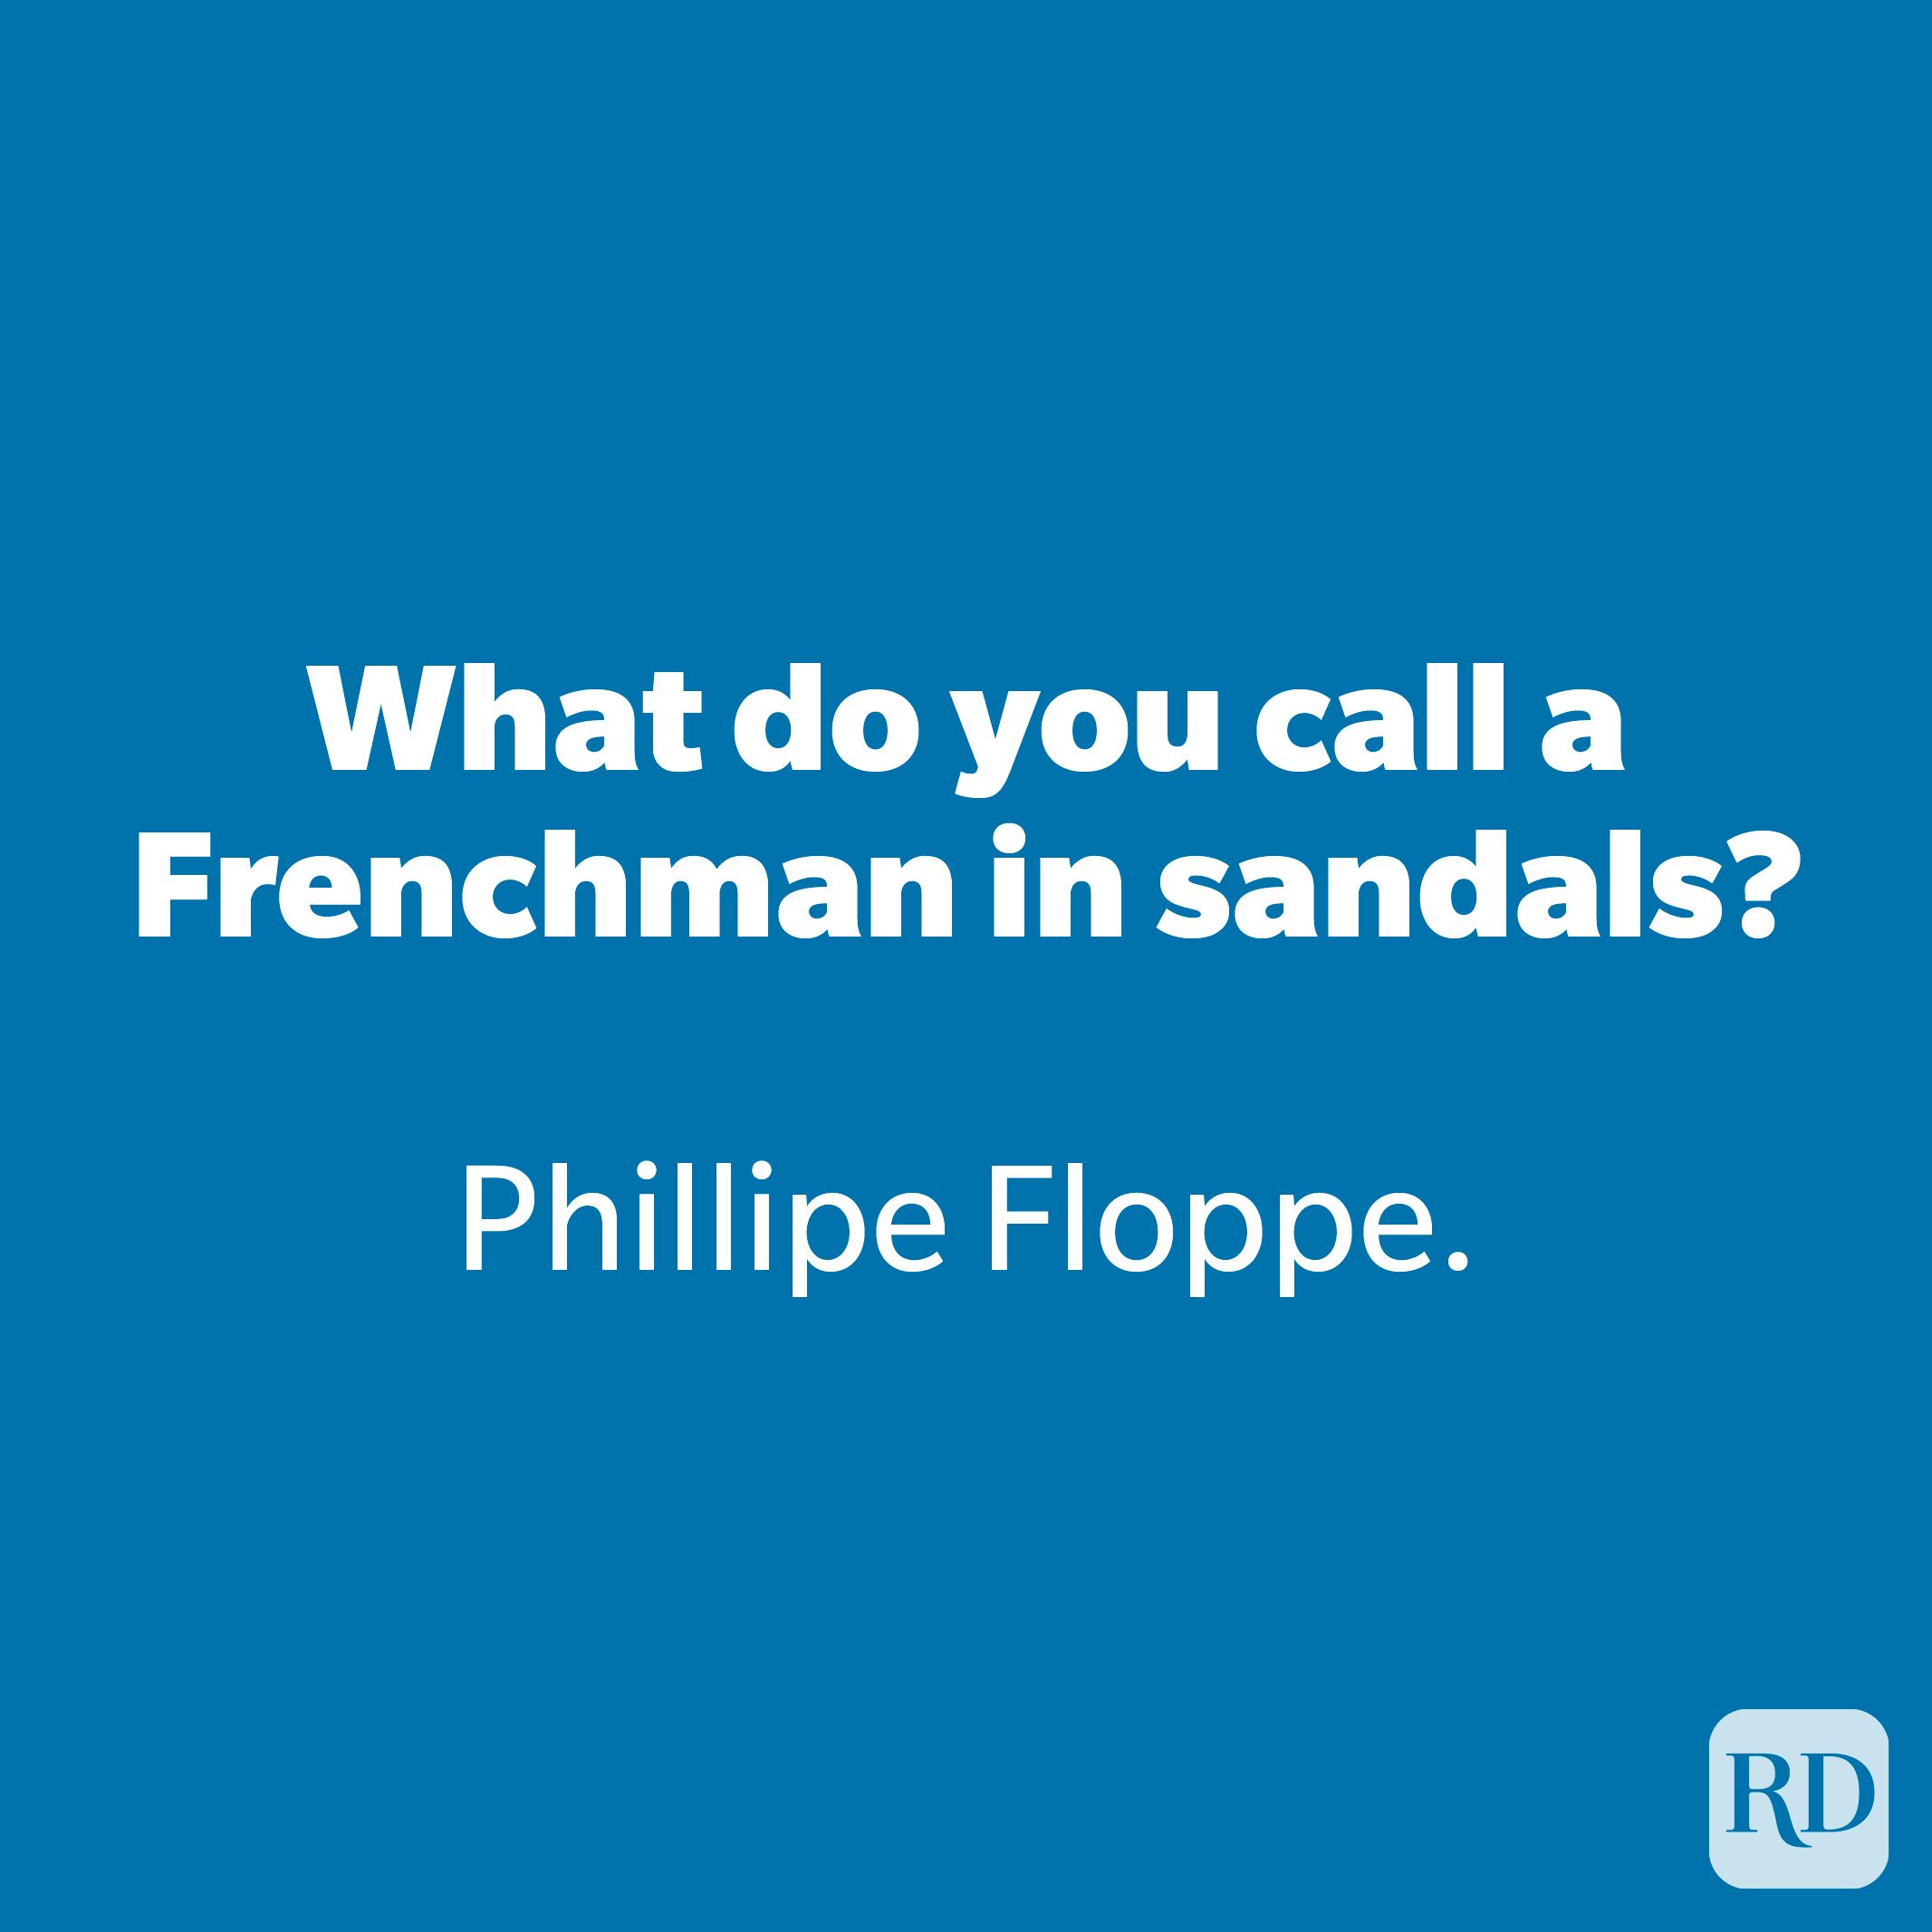 What do you call a Frenchman in sandals?